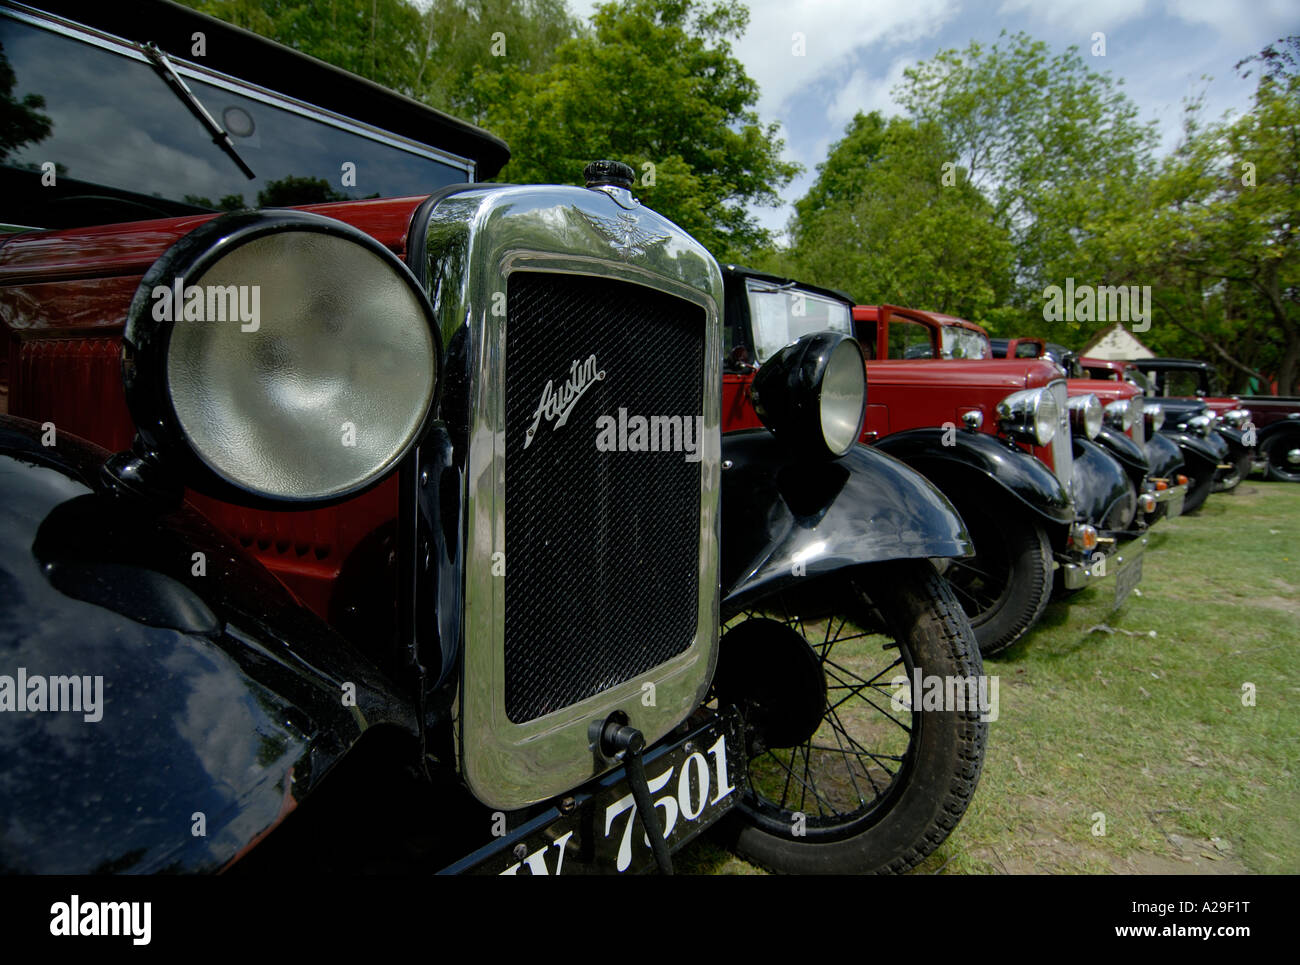 A row of cars Austin Sevens at a classic car show Stock Photo